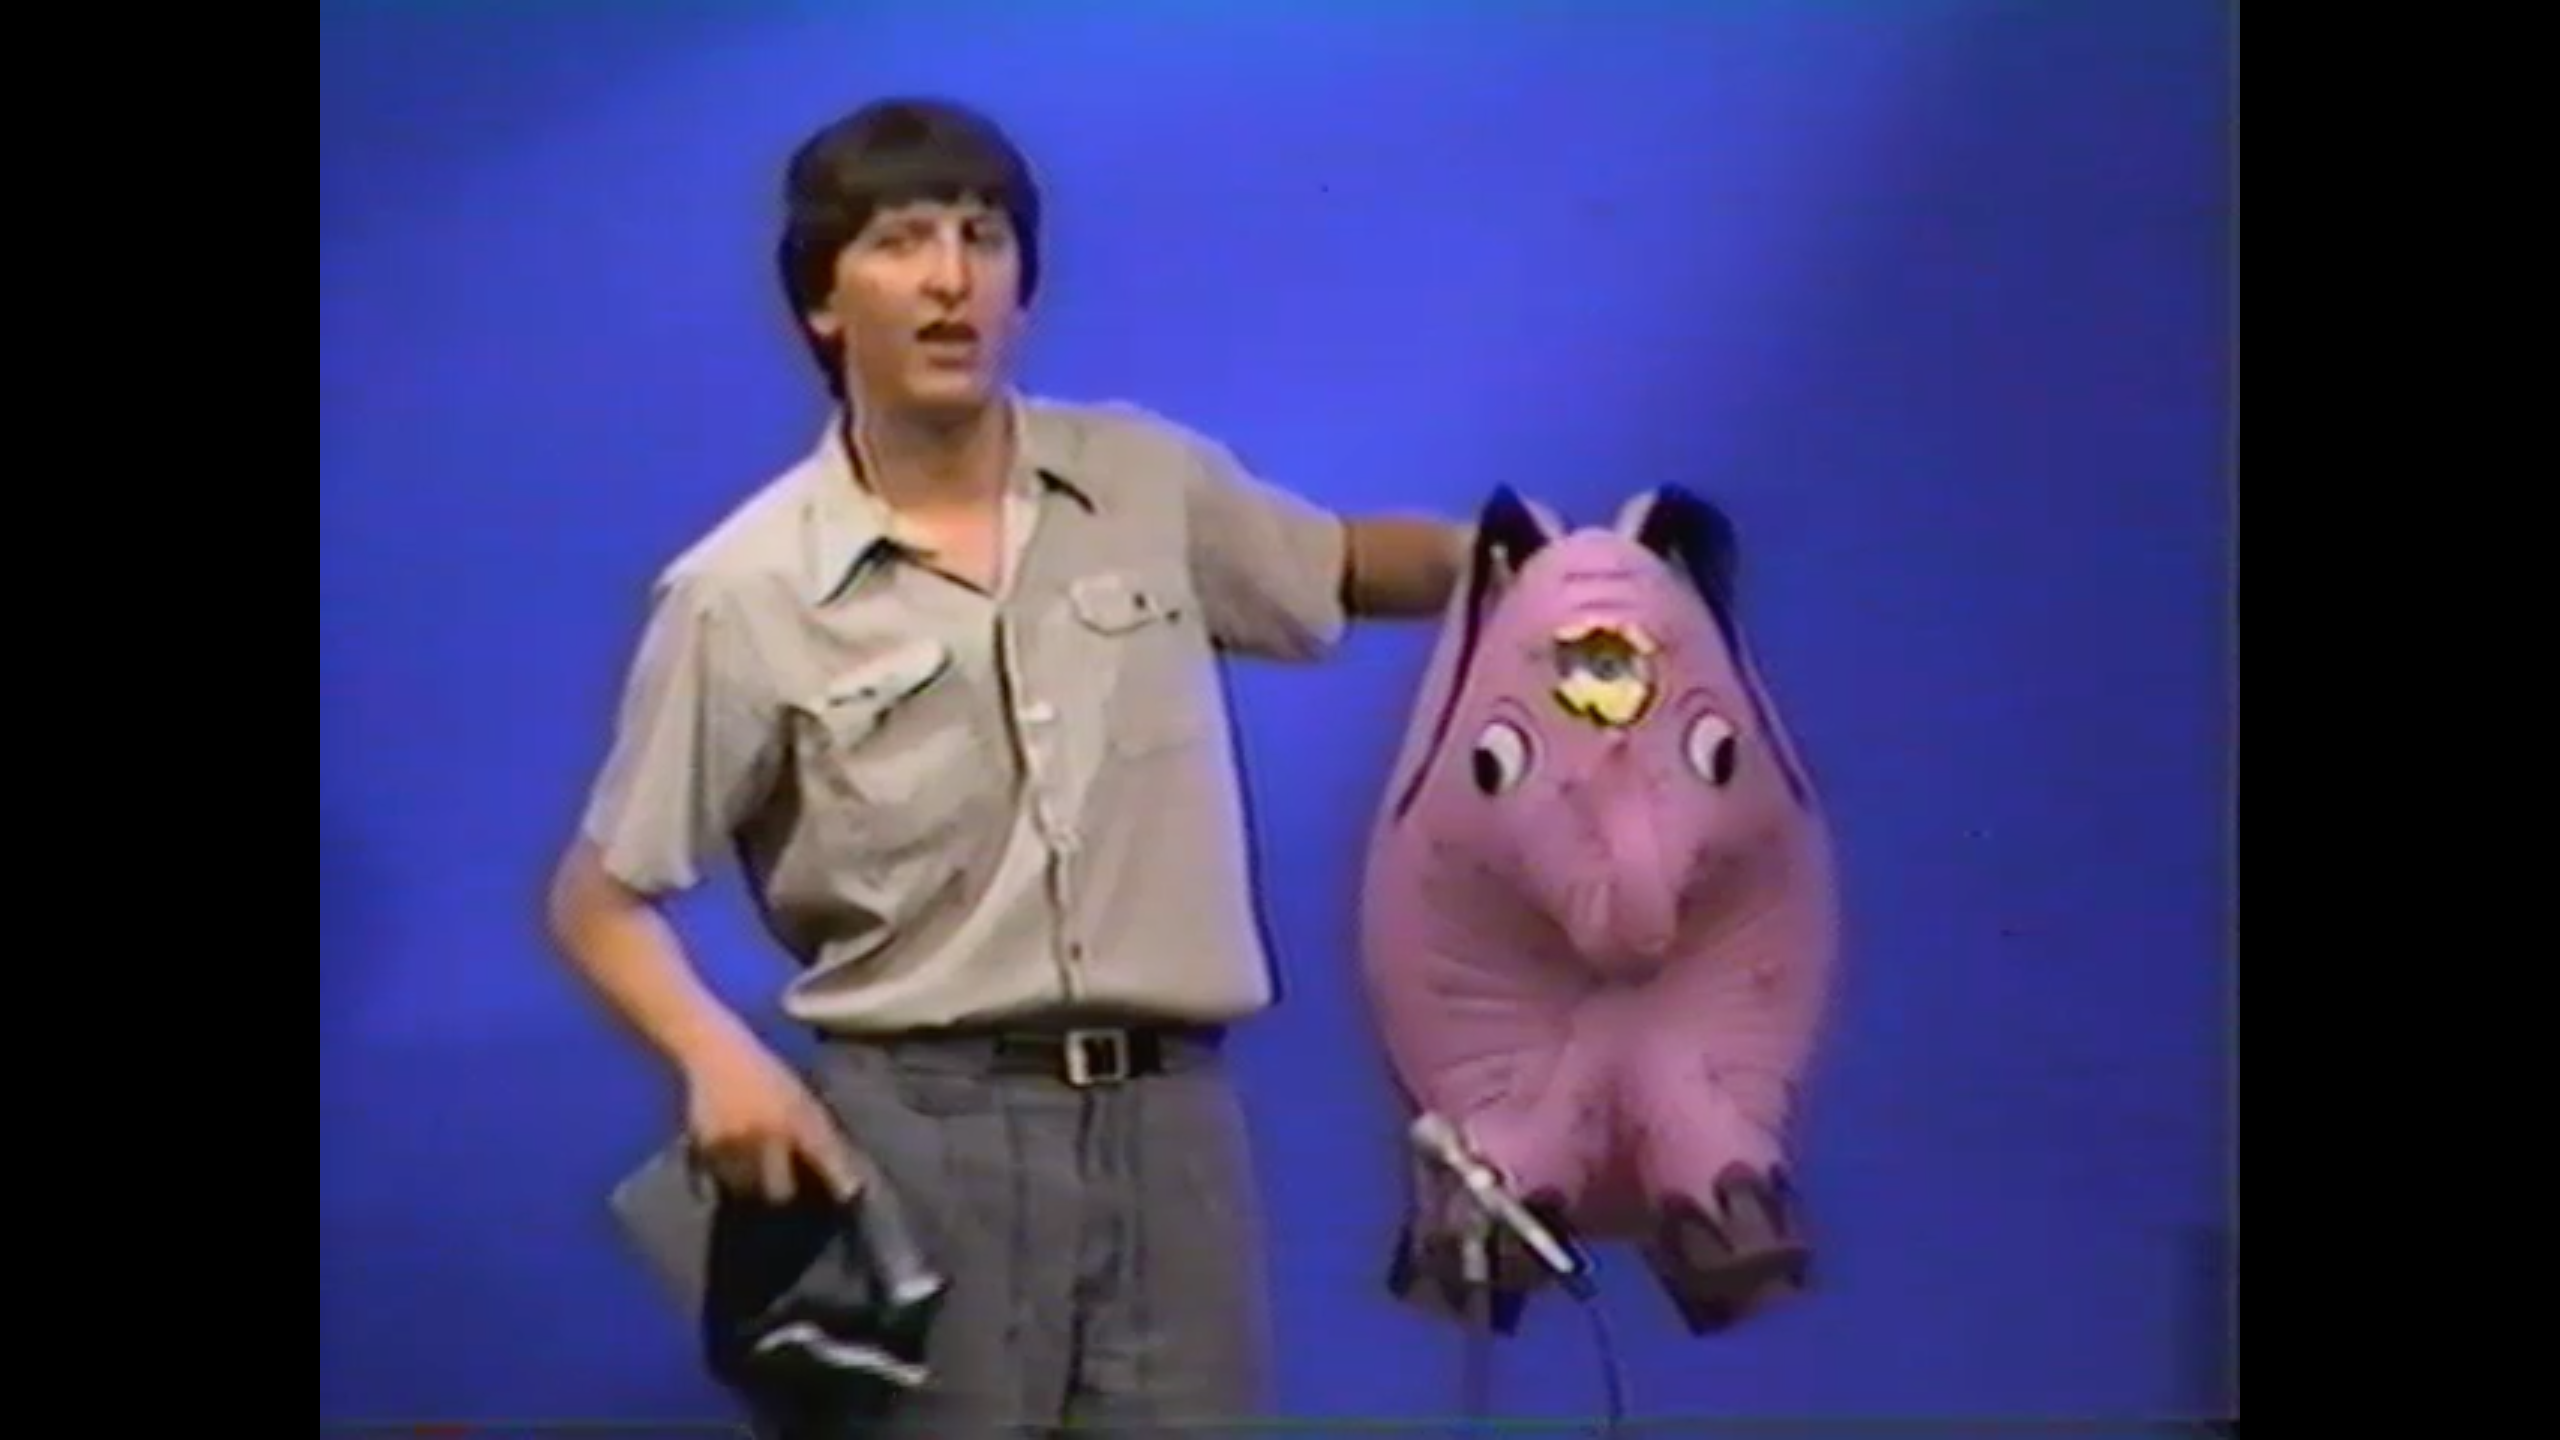 Photo of Stephan Alexander Parker introducing his comedy and magic partner, Herby the Amazing Disappearing Elephant on The Friday Club in Evanston, Illinois in the 1980s.